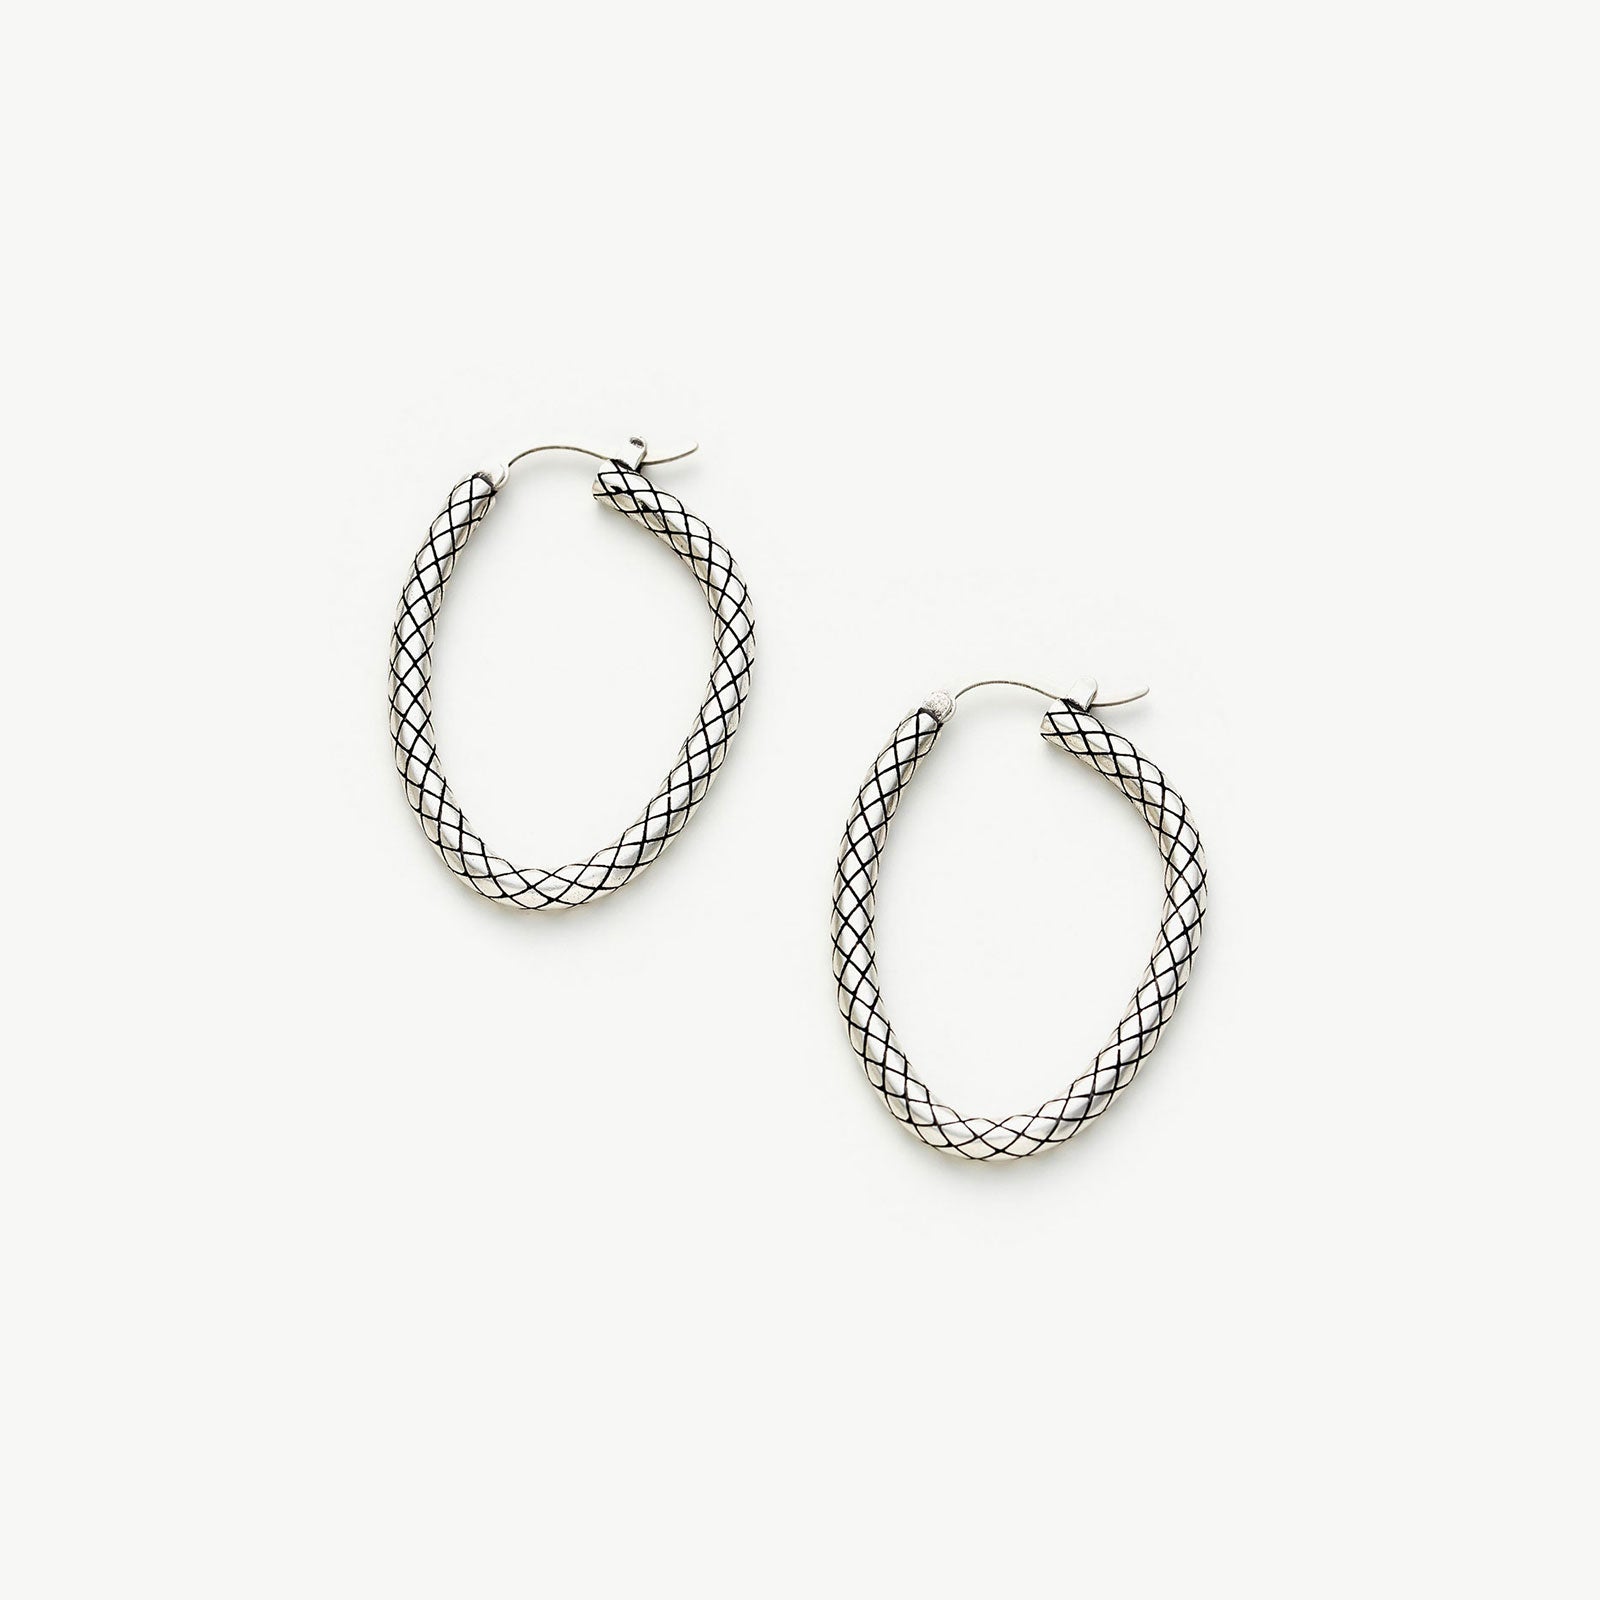 Front Facing Hoop Earrings, a chic and modern accessory designed to face forward, adding a contemporary twist to classic hoop elegance